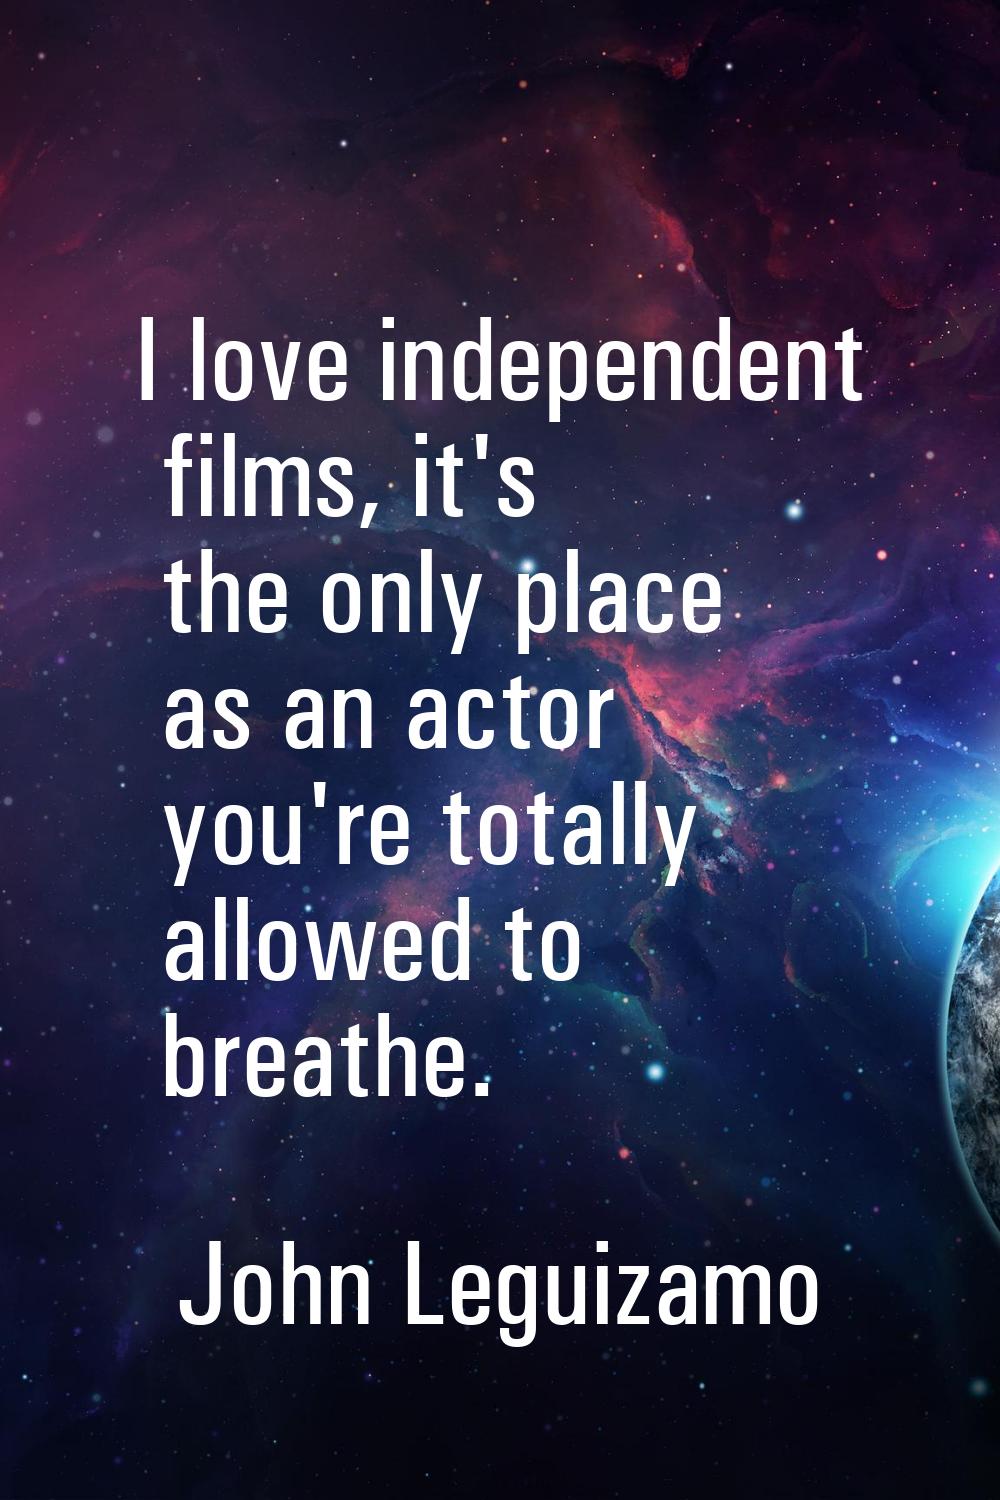 I love independent films, it's the only place as an actor you're totally allowed to breathe.